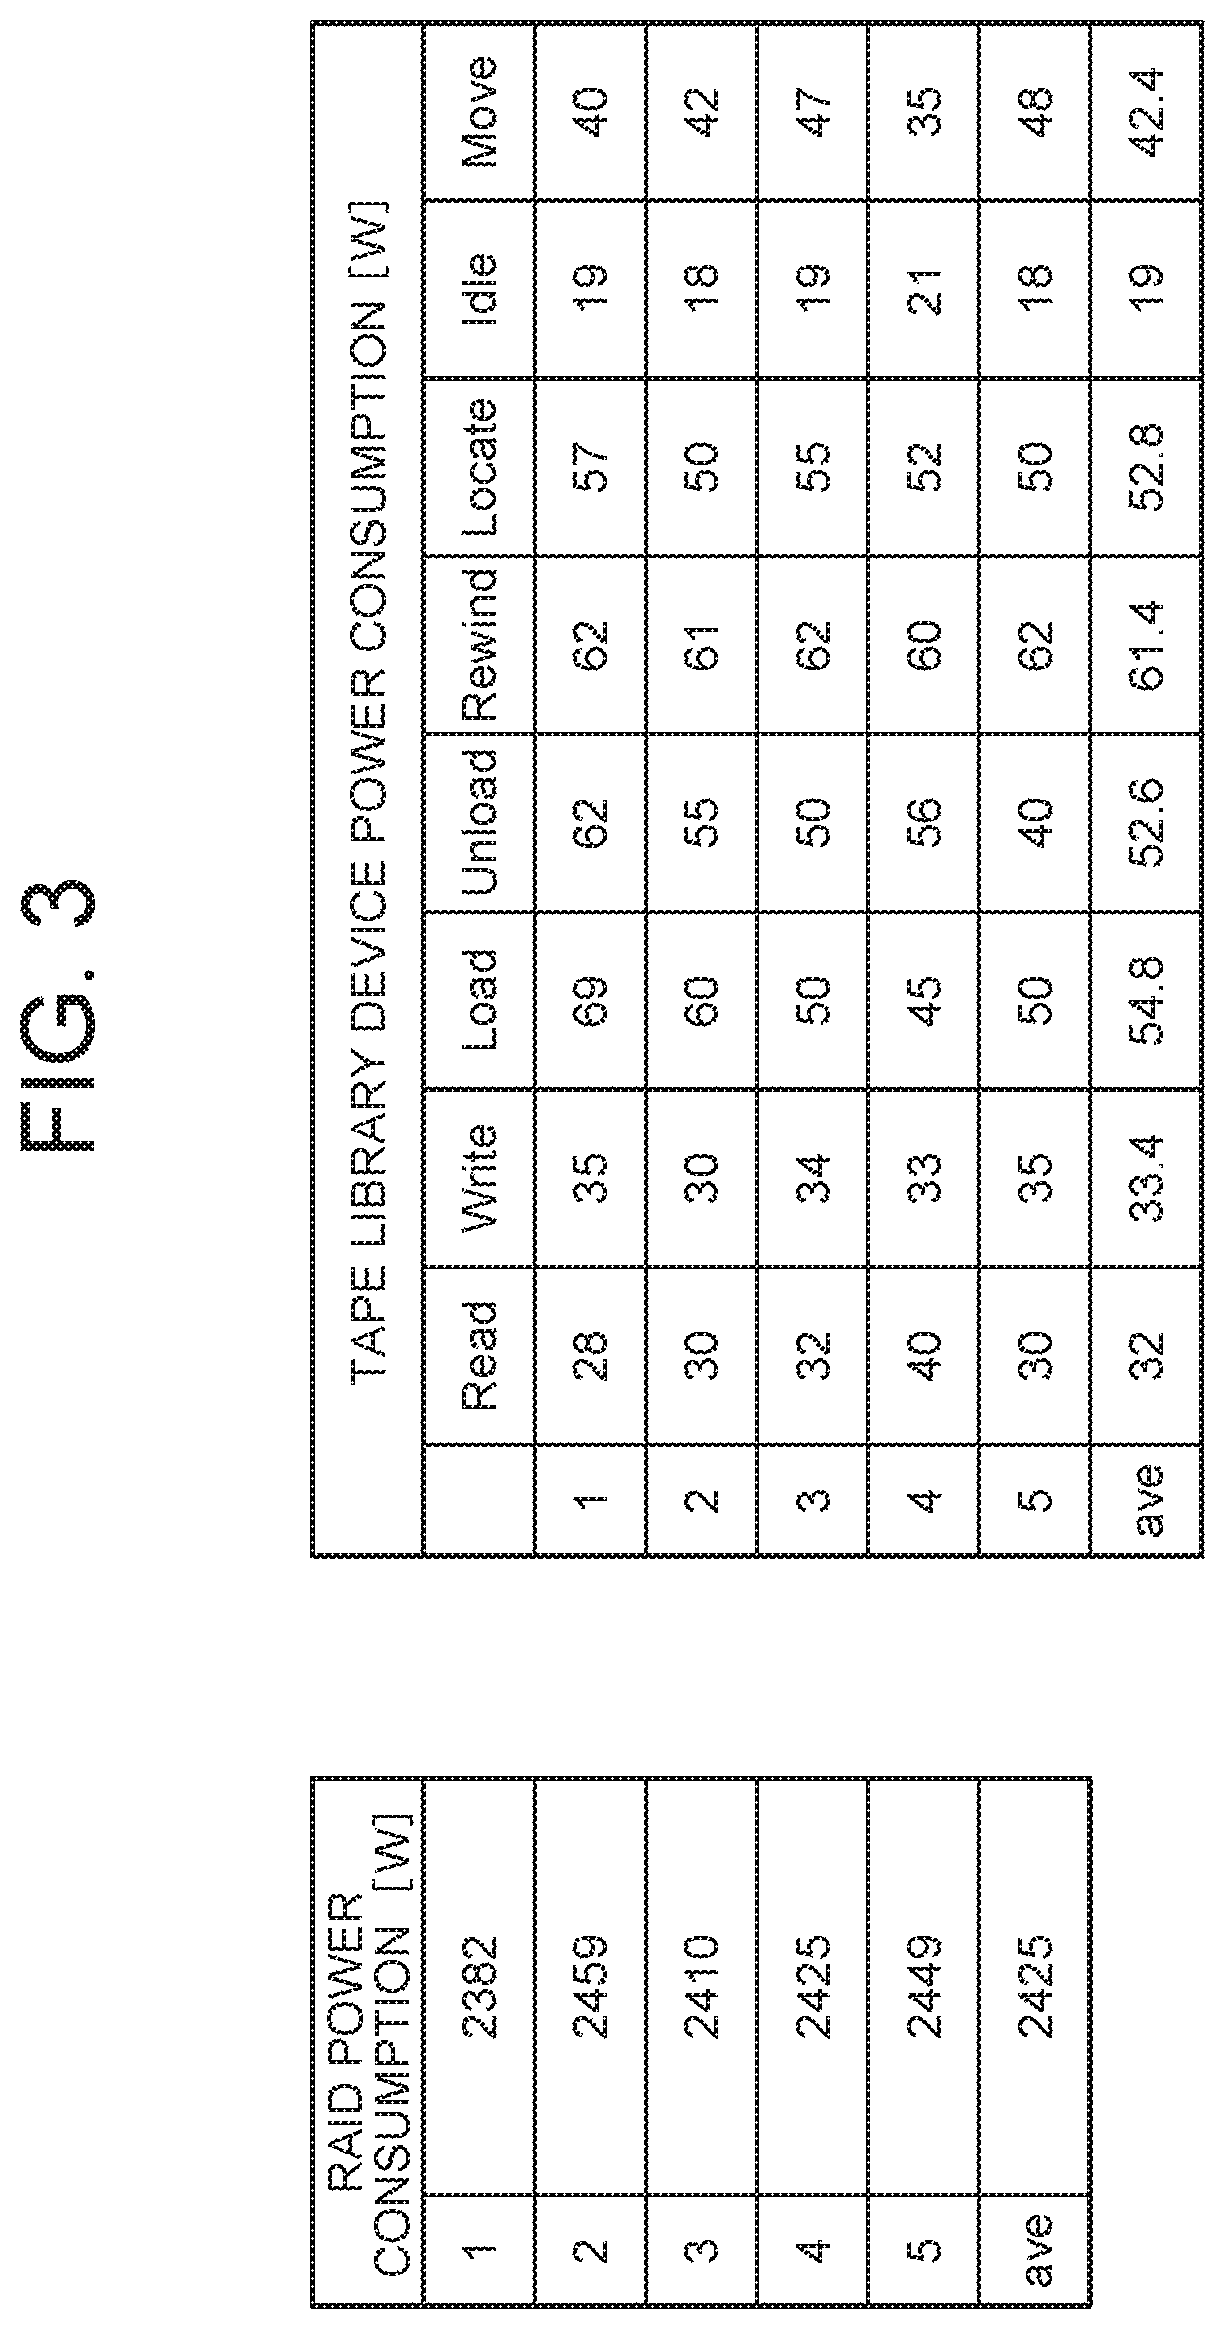 Information processing apparatus that moves file based on file size, file access interval time and storage power consumption